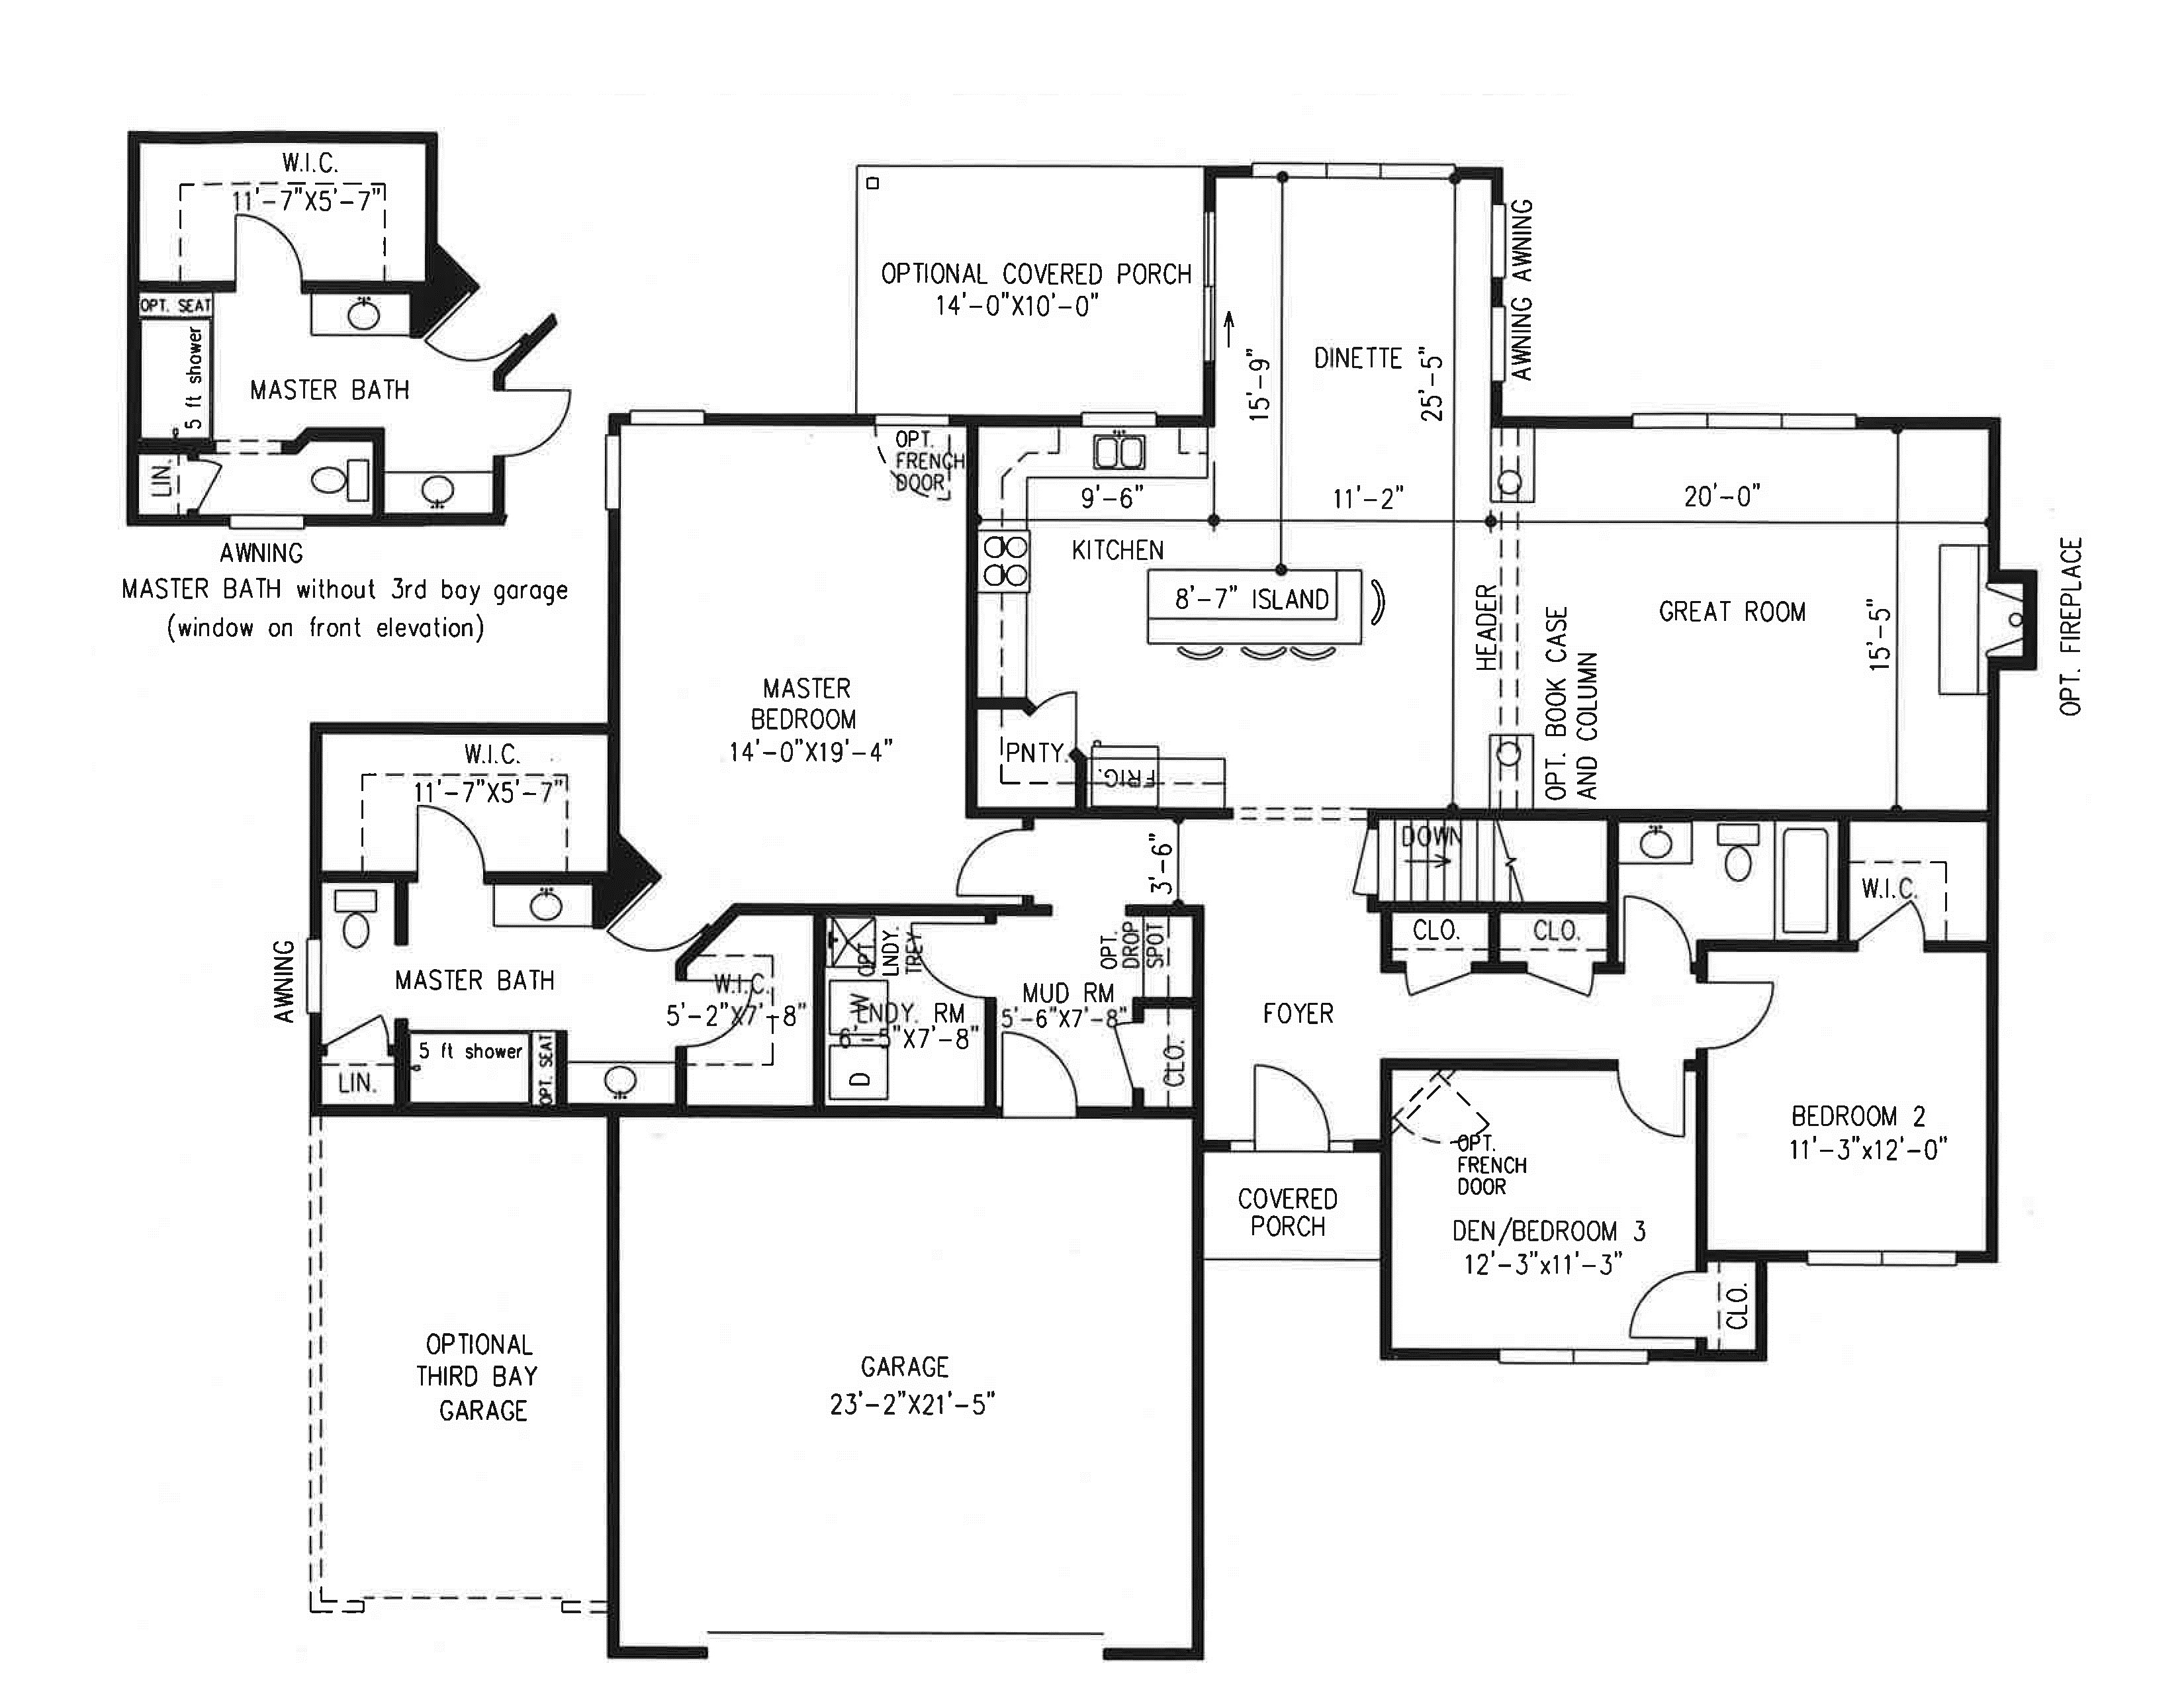 Golden floor plan wthout dimensions Alliance Homes